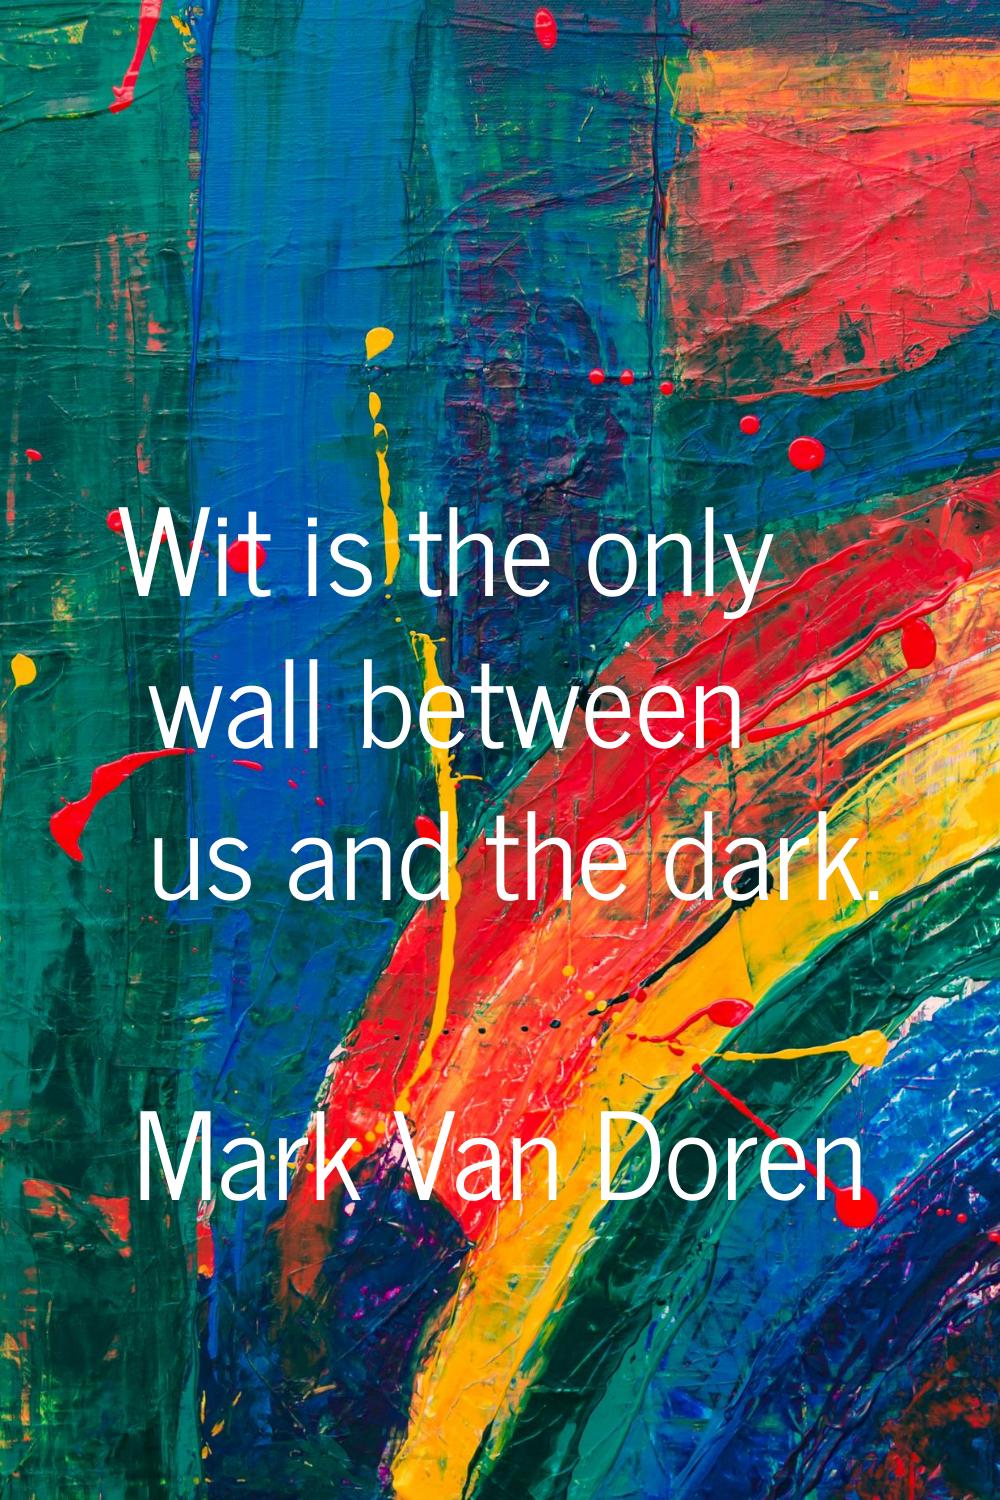 Wit is the only wall between us and the dark.